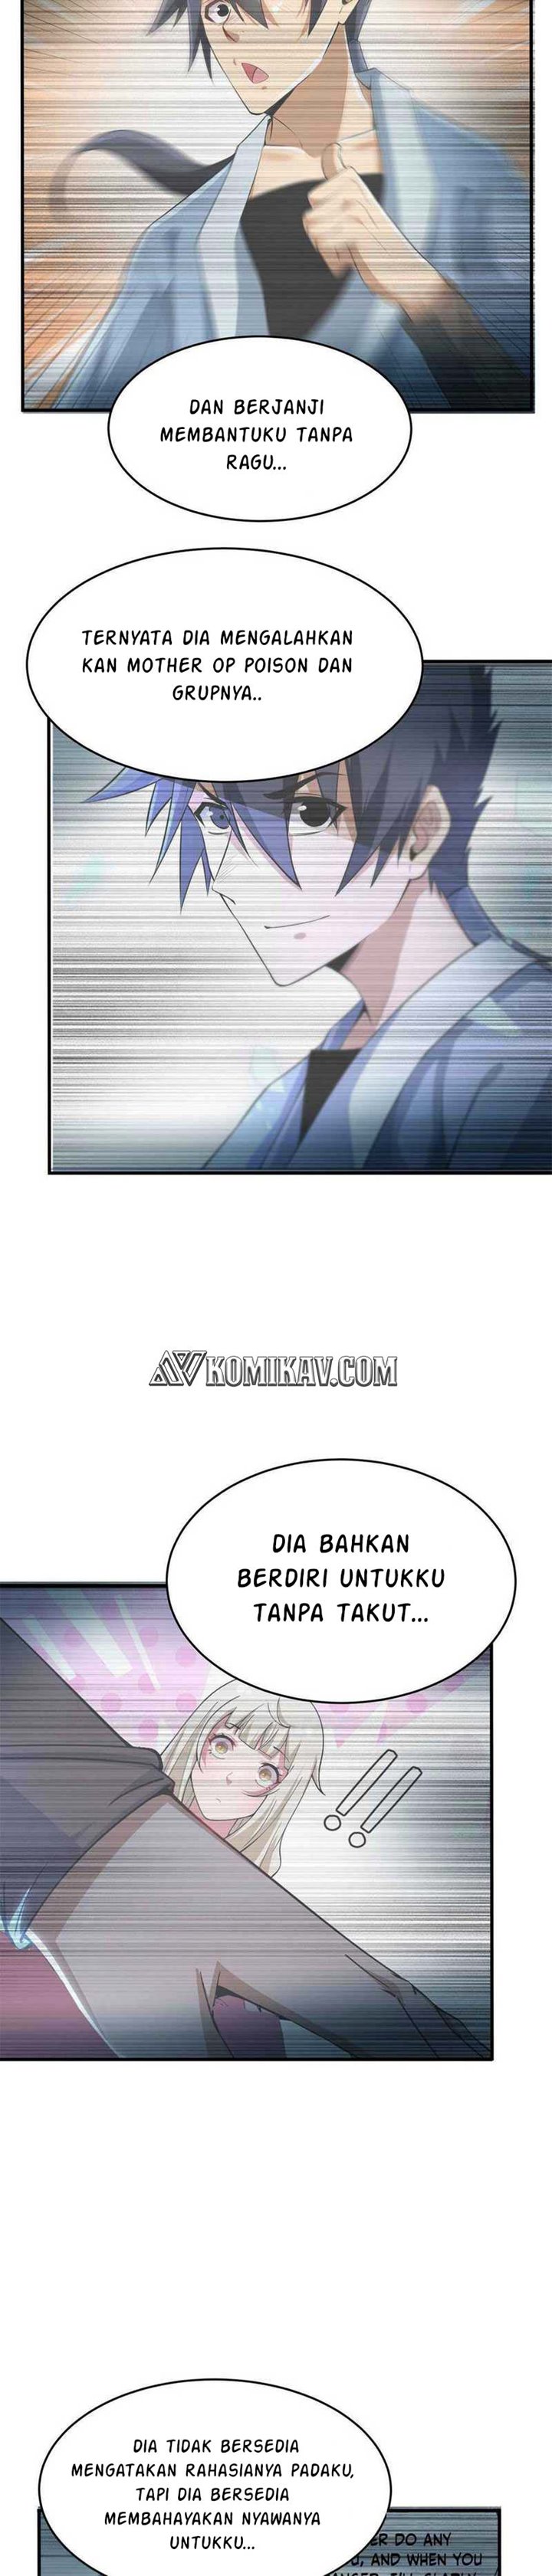 Dilarang COPAS - situs resmi www.mangacanblog.com - Komik i just want to be beaten to death by everyone 020 - chapter 20 21 Indonesia i just want to be beaten to death by everyone 020 - chapter 20 Terbaru 14|Baca Manga Komik Indonesia|Mangacan